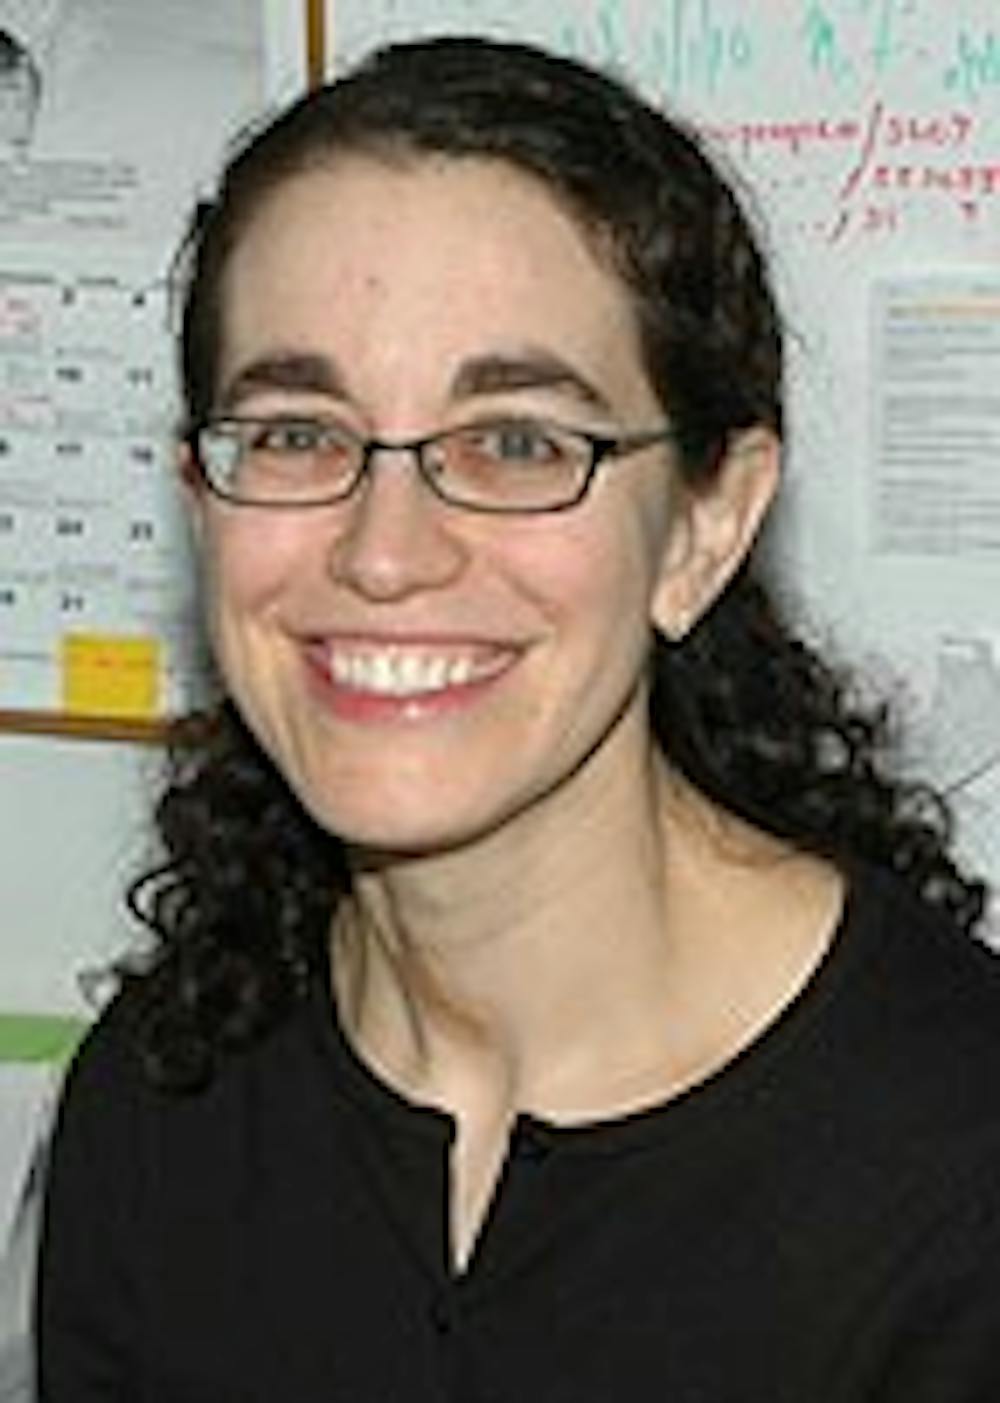 Dr. Tanya Schlam was the lead researcher on the UW Center for Tobacco Research and Intervention study.